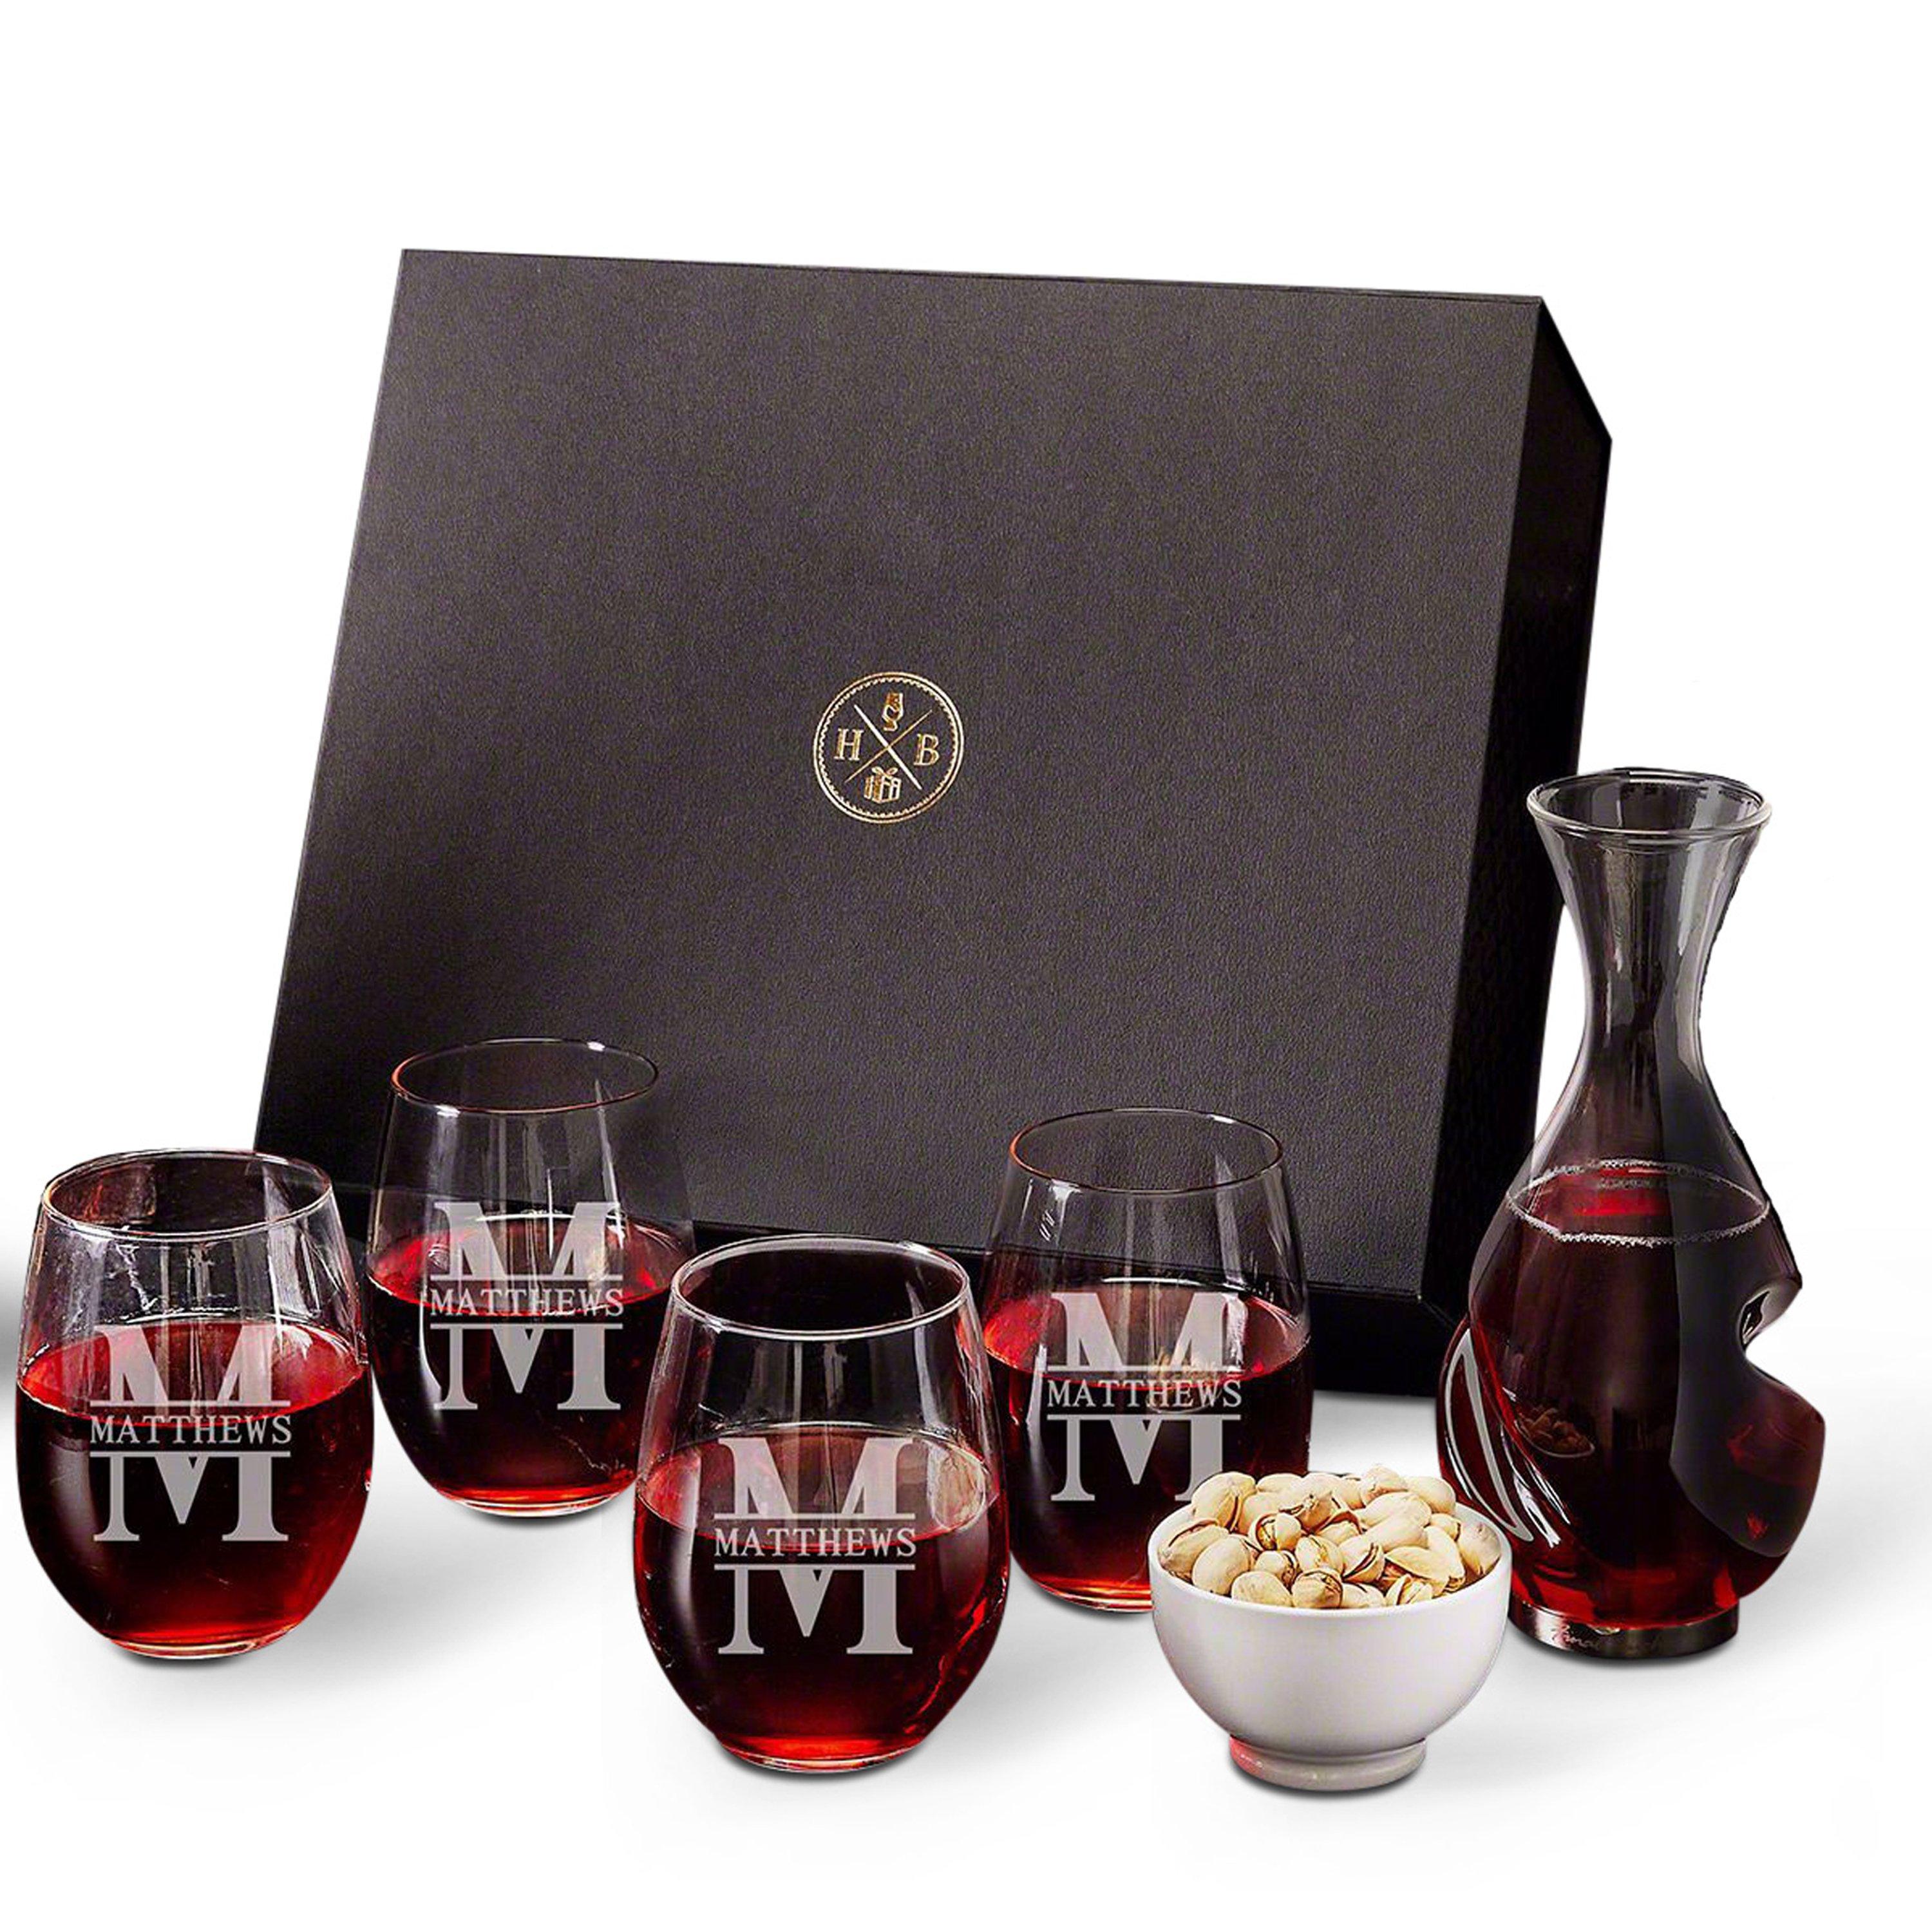 Luxury Wine Aerating Decanter and Stemless Wine Glasses 7-Piece Box Set